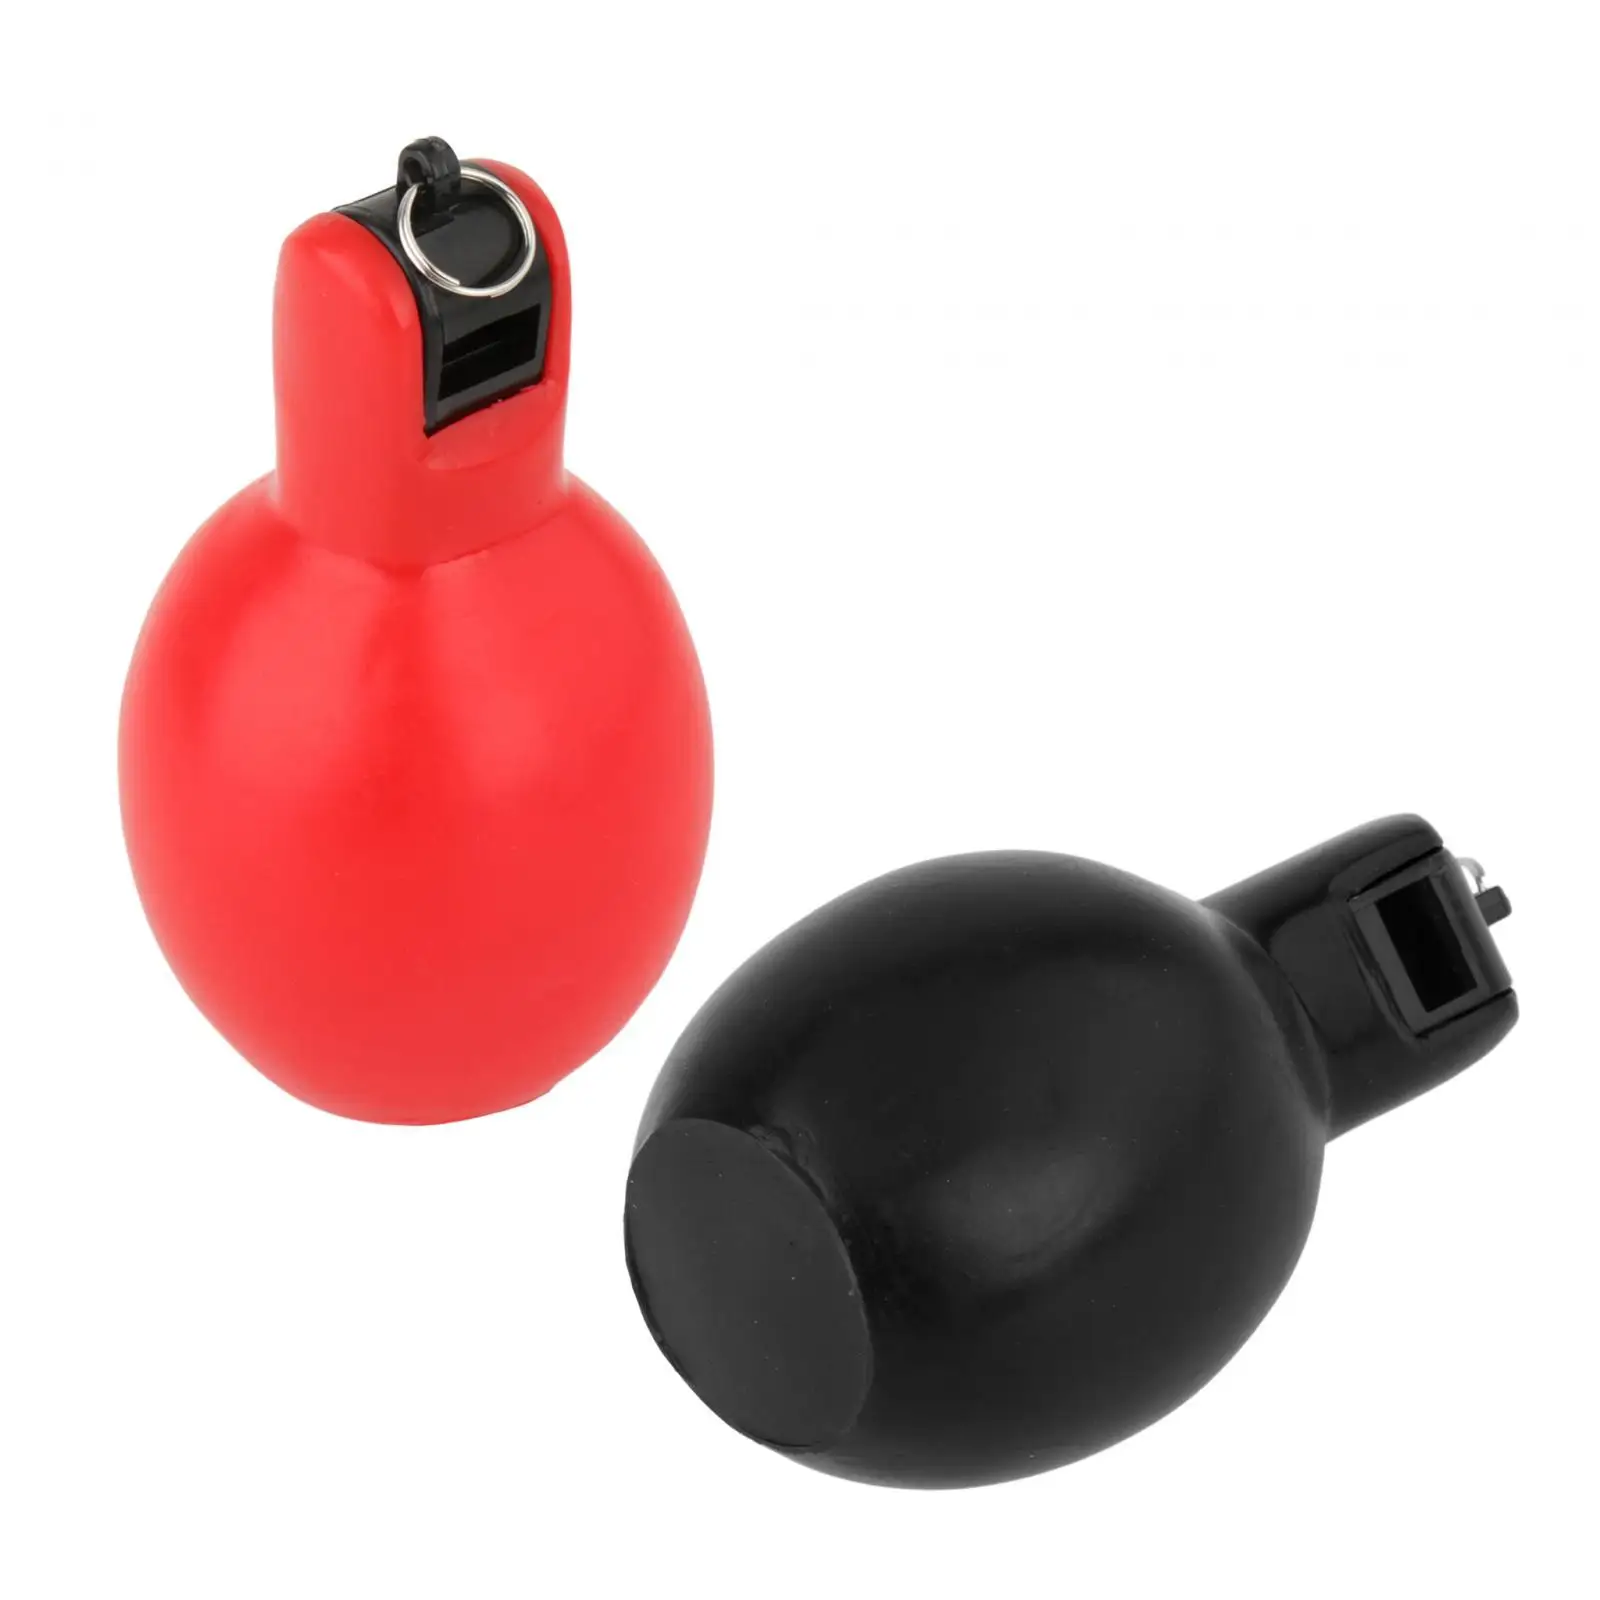 2 Pieces Hand Squeeze Whistles Coaches Whistle Loud Soft PVC Sports Whistle Trainer Whistle for Football Home School Referees